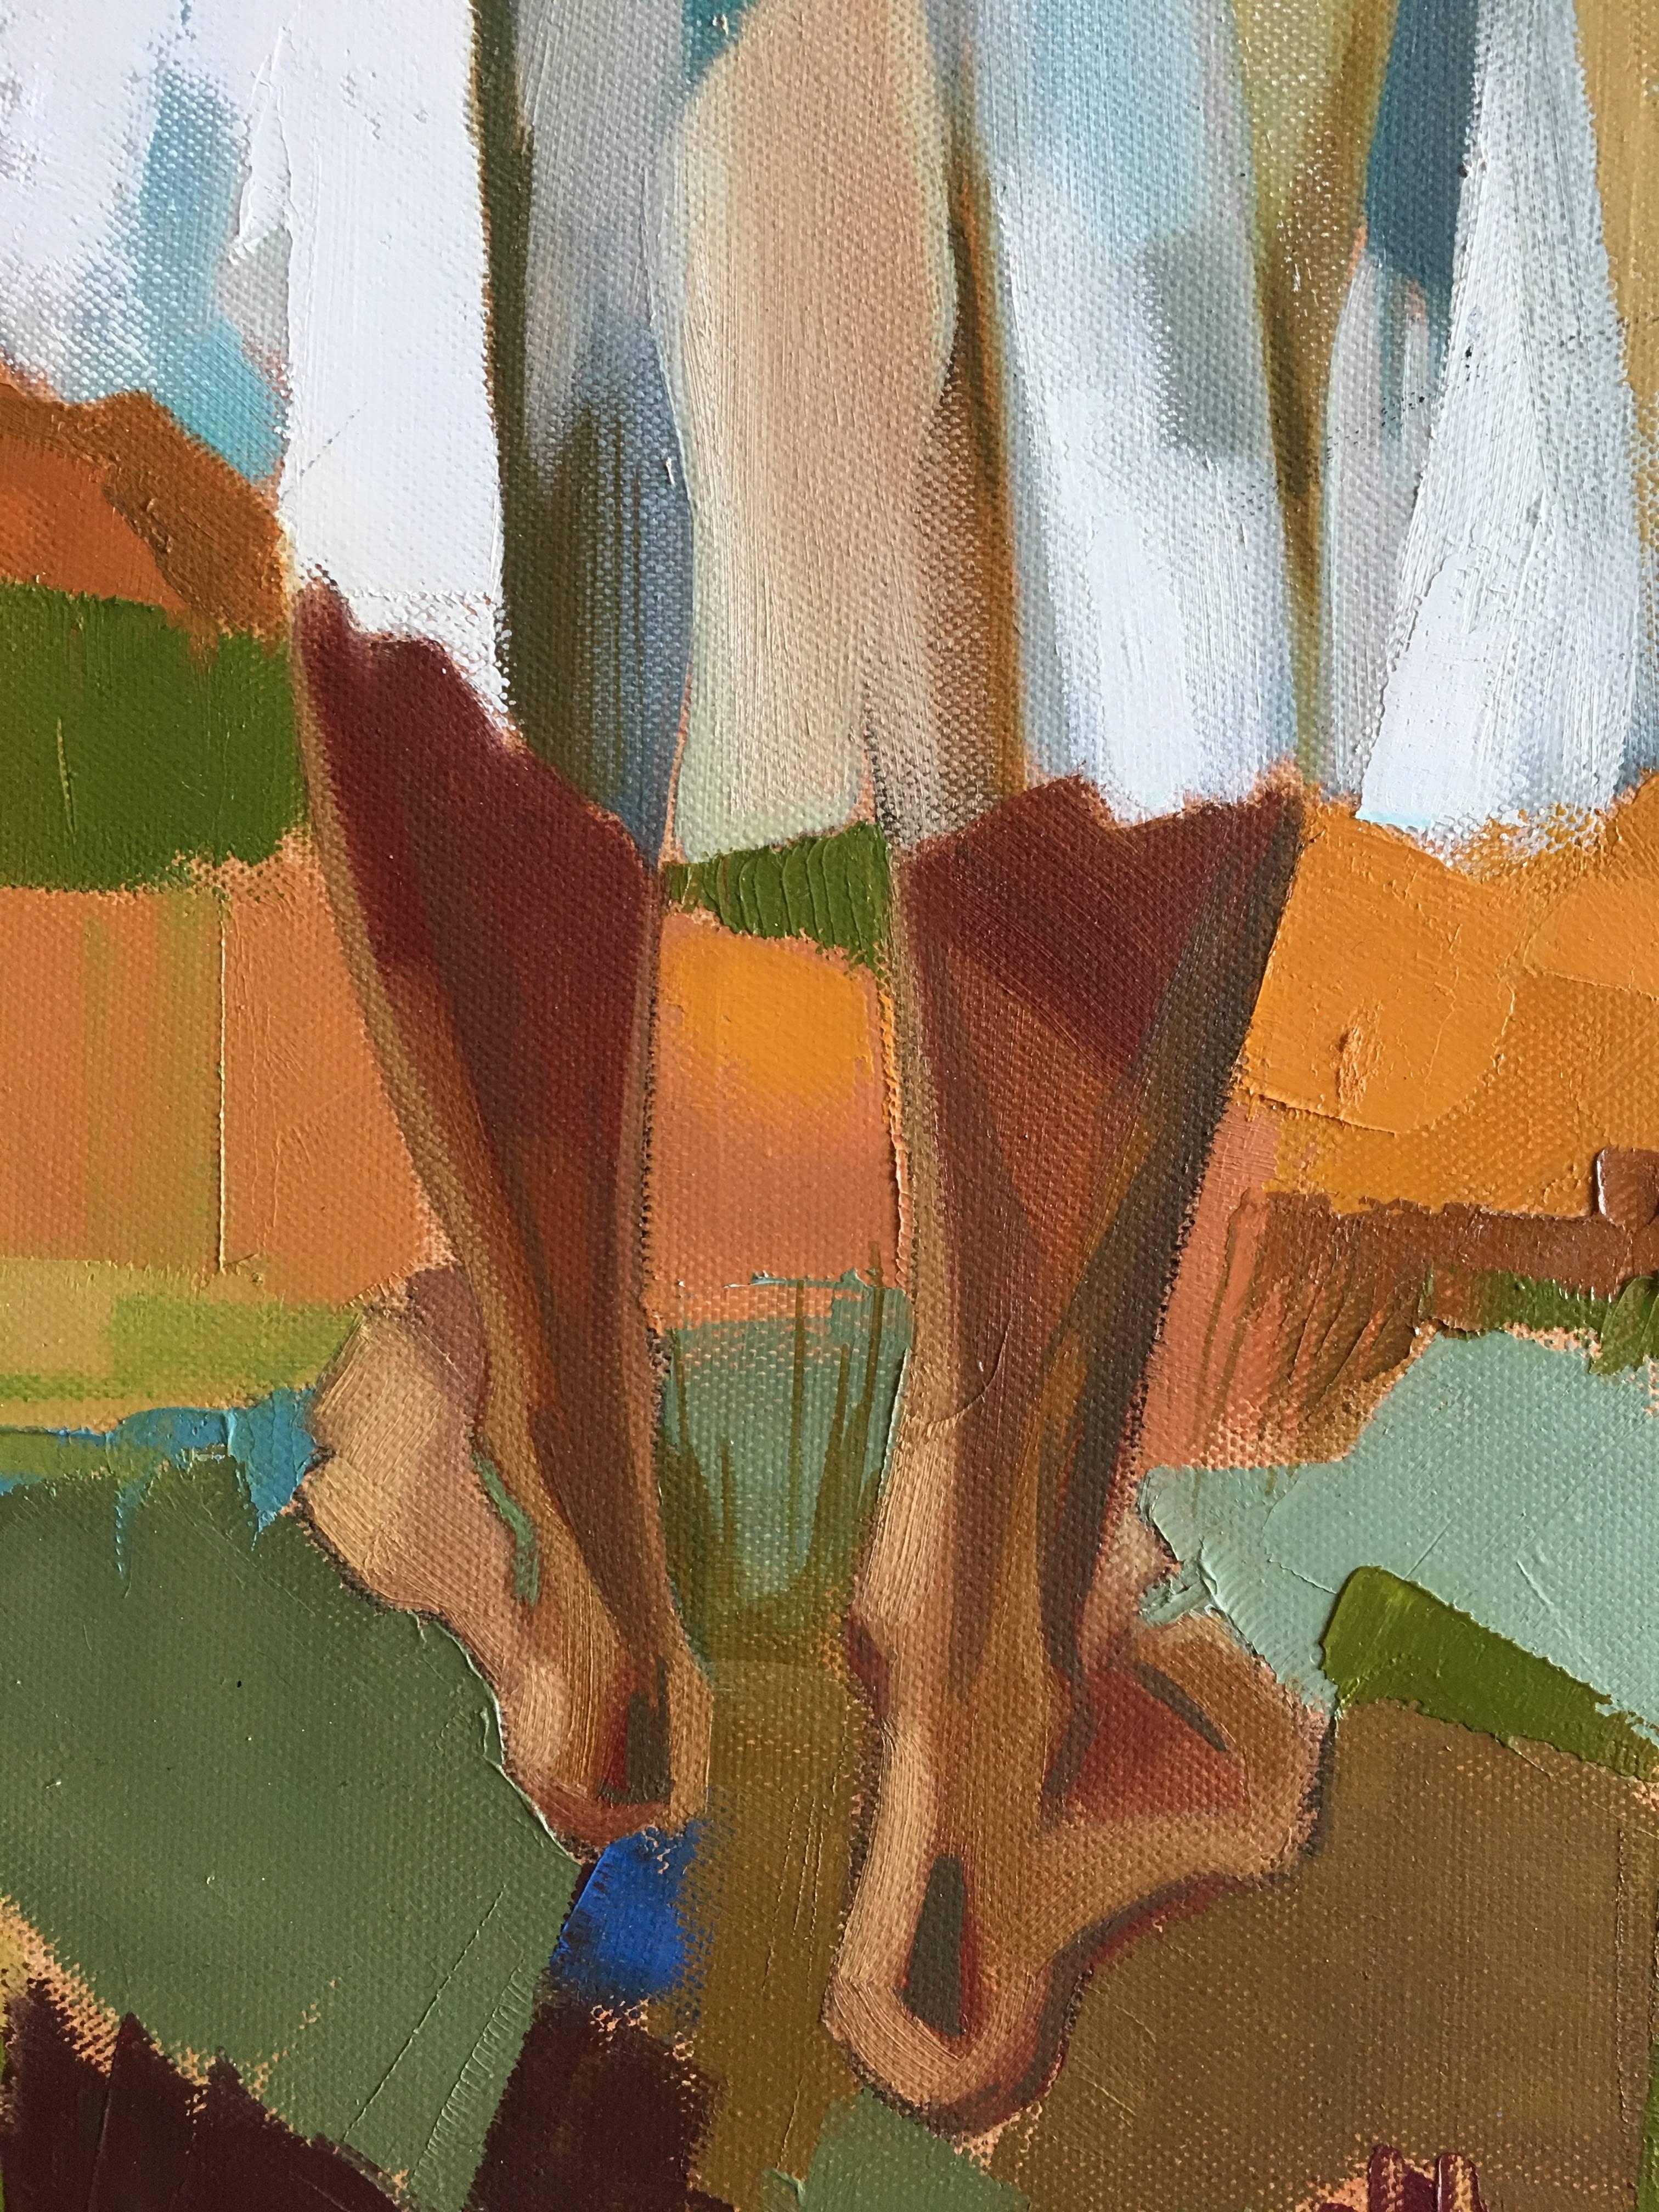 Harvest in the field After Summer, Oil on canvas, Colorful Expressionist Style 8